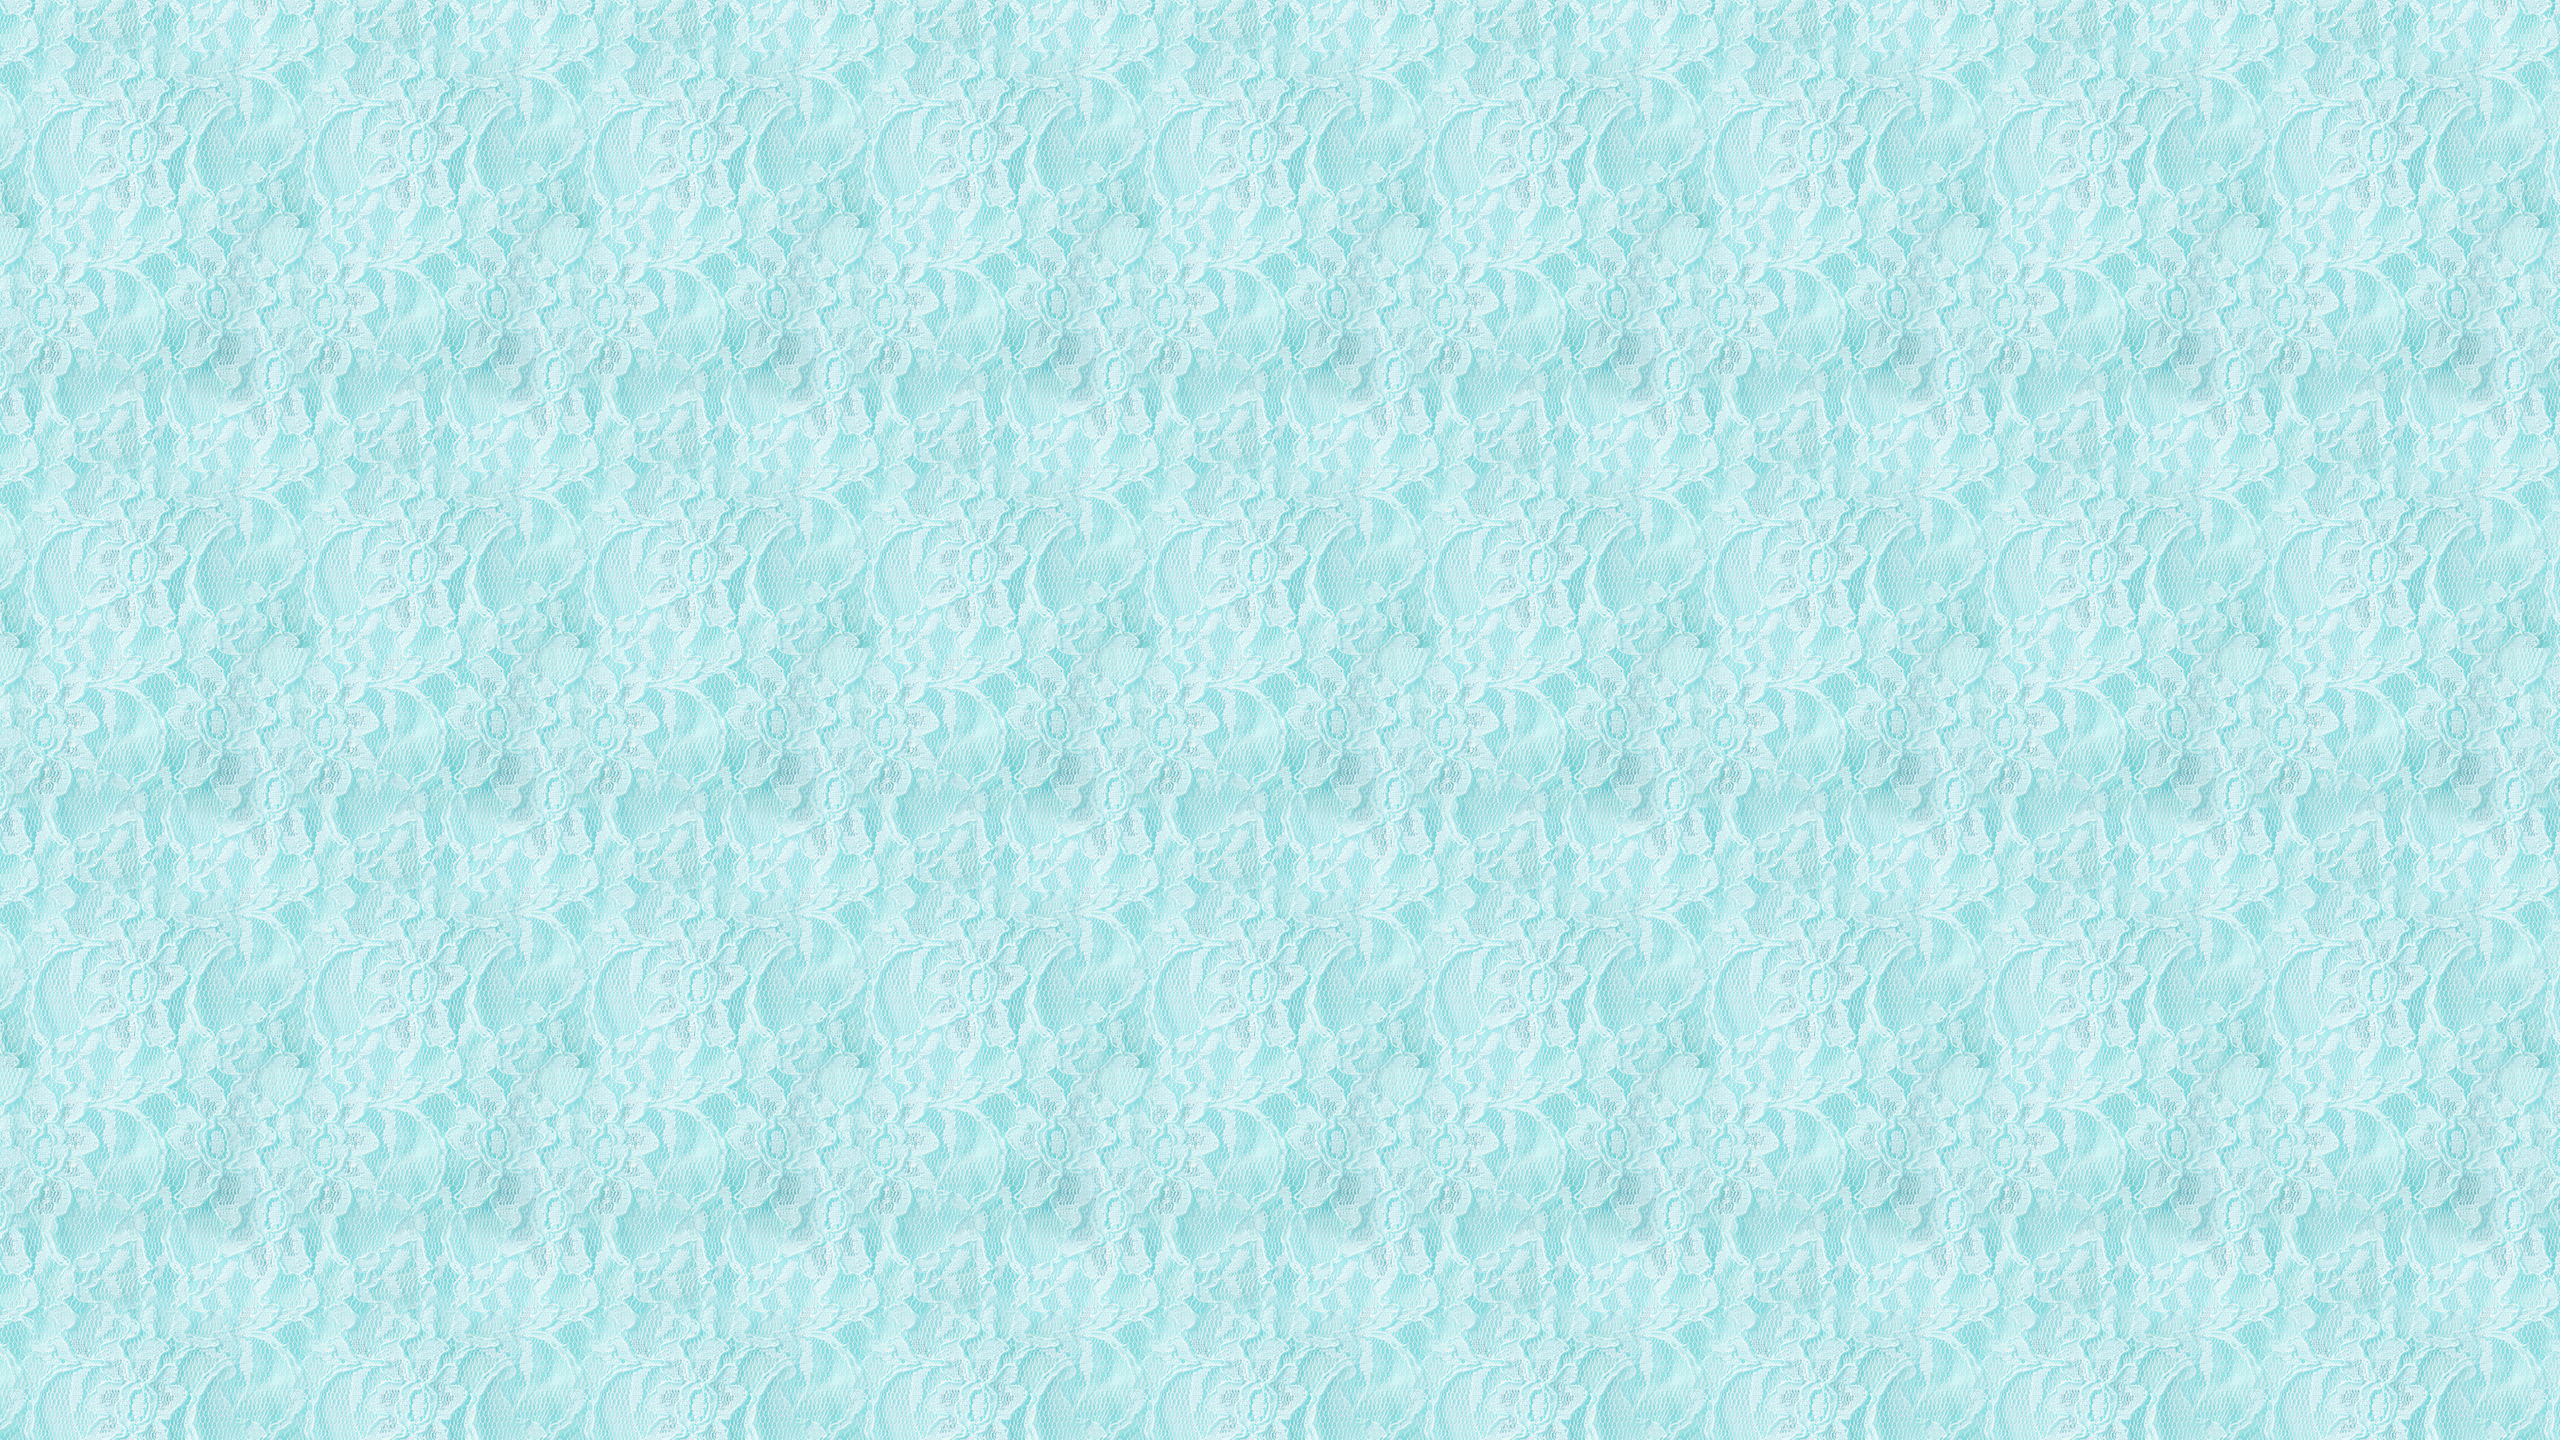 This Teal Lace Desktop Wallpaper Is Easy Just Save The